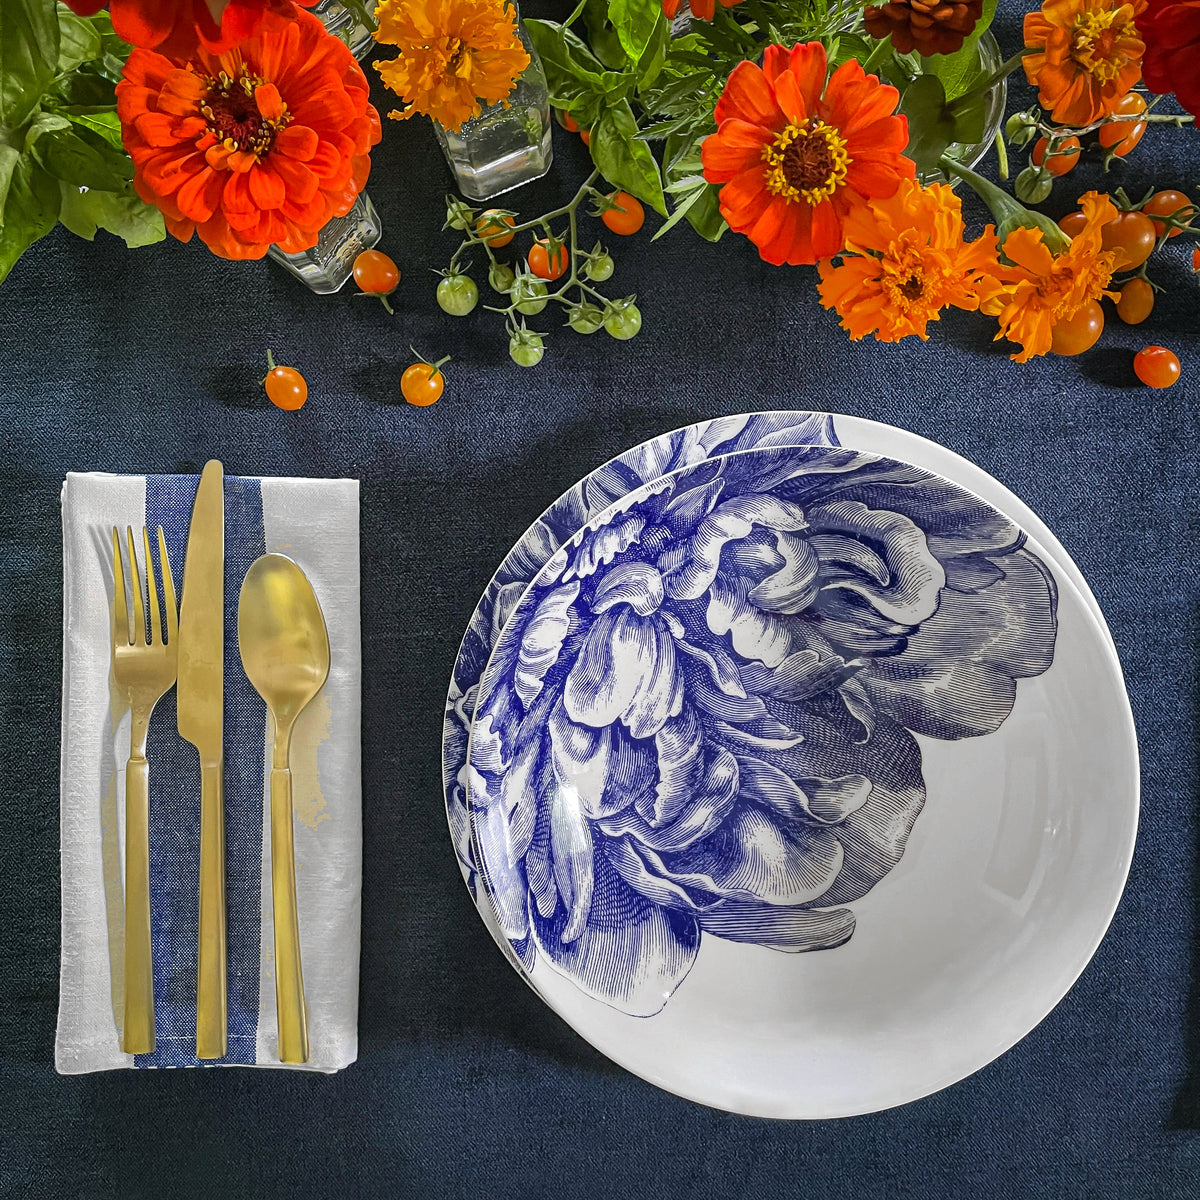 A table setting featuring Peony Coupe Soup Bowls from Caskata Artisanal Home in blue floral, gold cutlery, and bright orange flowers on a dark blue tablecloth.